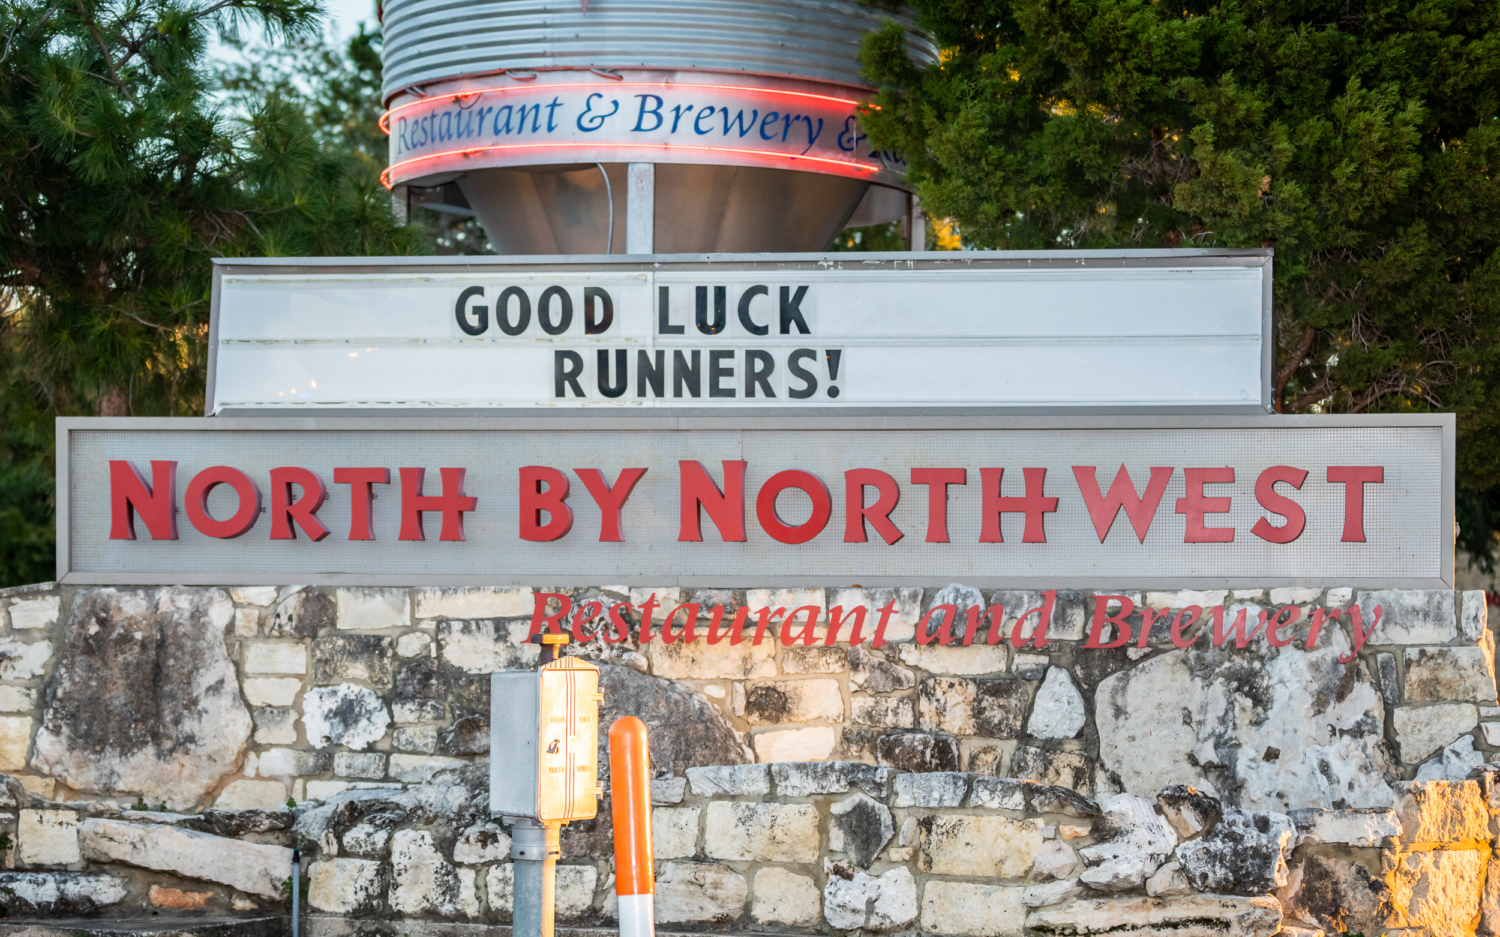 North by Northwest sign greets runners during the 2019 3M Half Marathon. Check out the various locations in this blog post along the 3M Half Marathon course and get to know Austin.